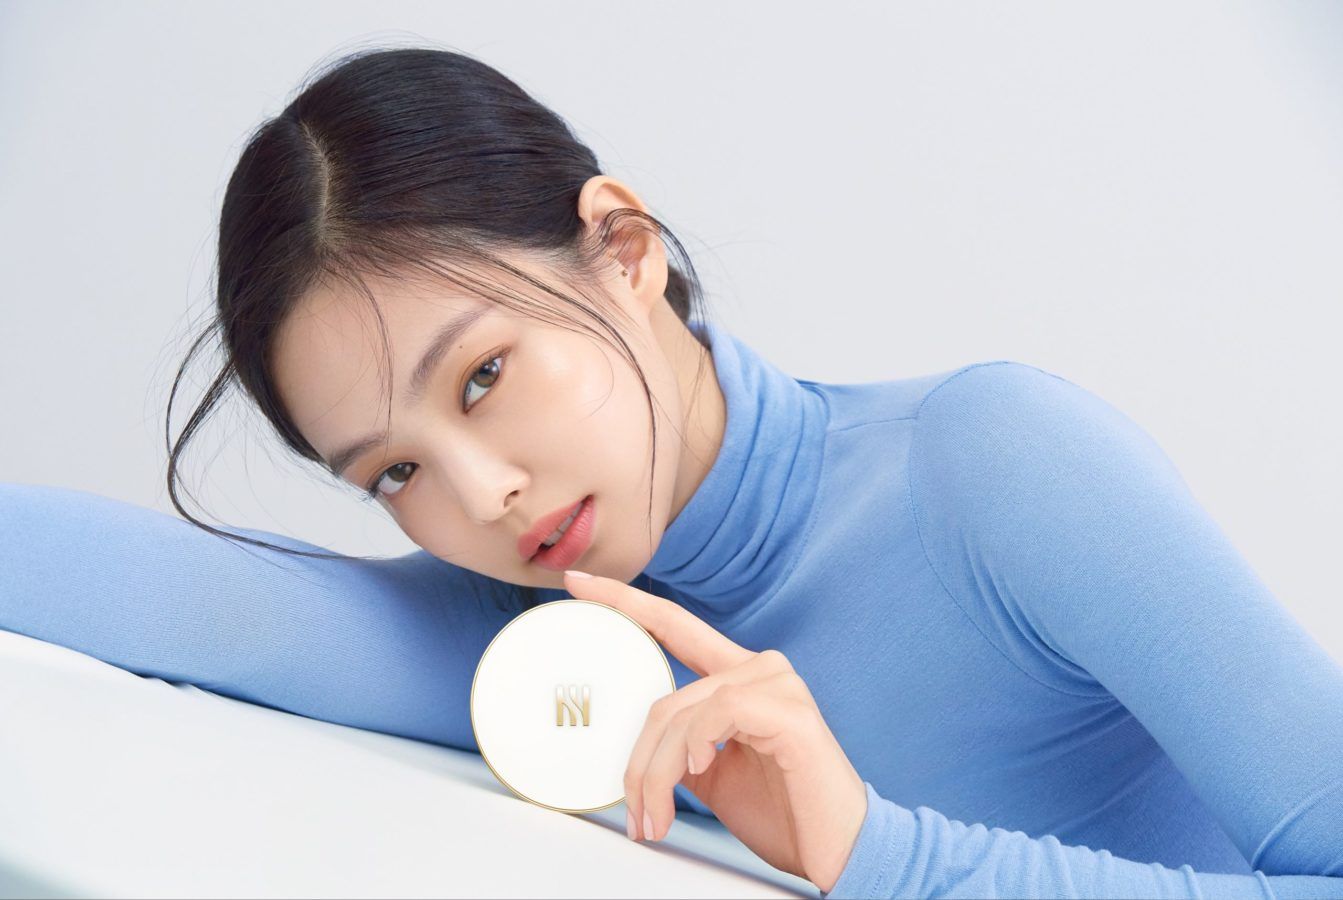 All the Korean beauty products Korean celebrities swear by for radiant skin